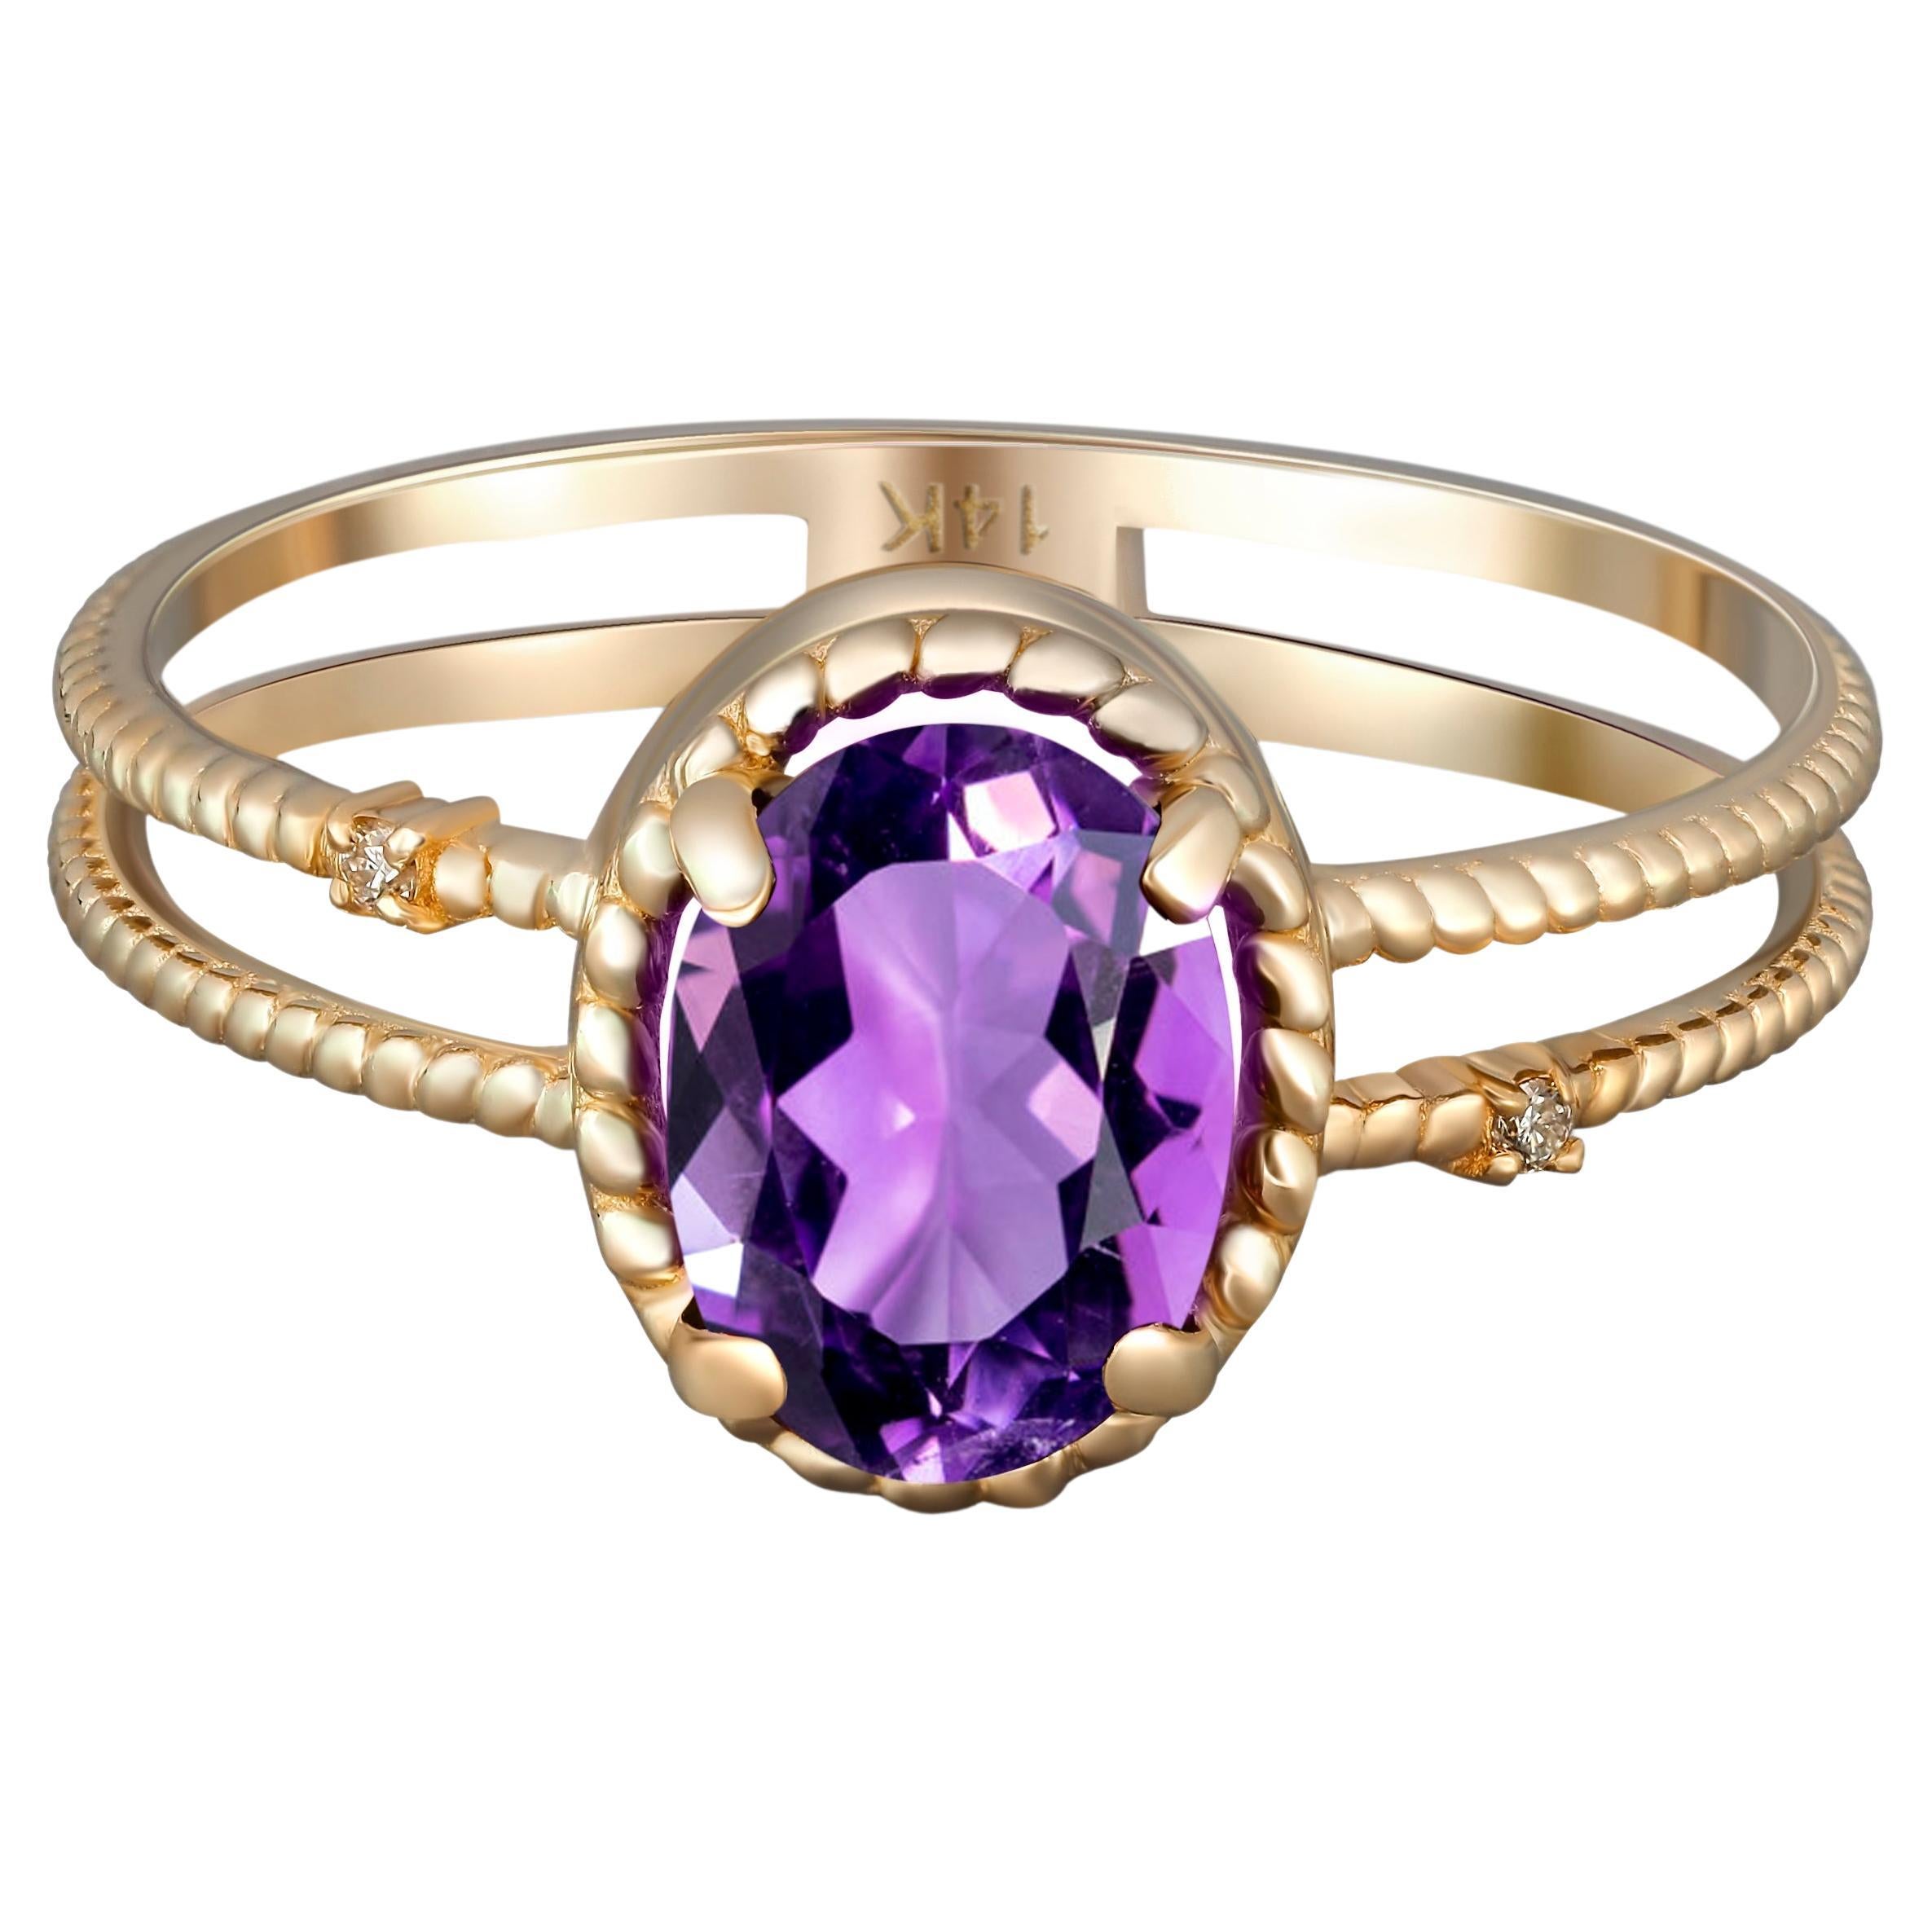 For Sale:  Amethyst Gold Ring, Oval Amethyst Ring, 14k Gold Ring with Amethyst